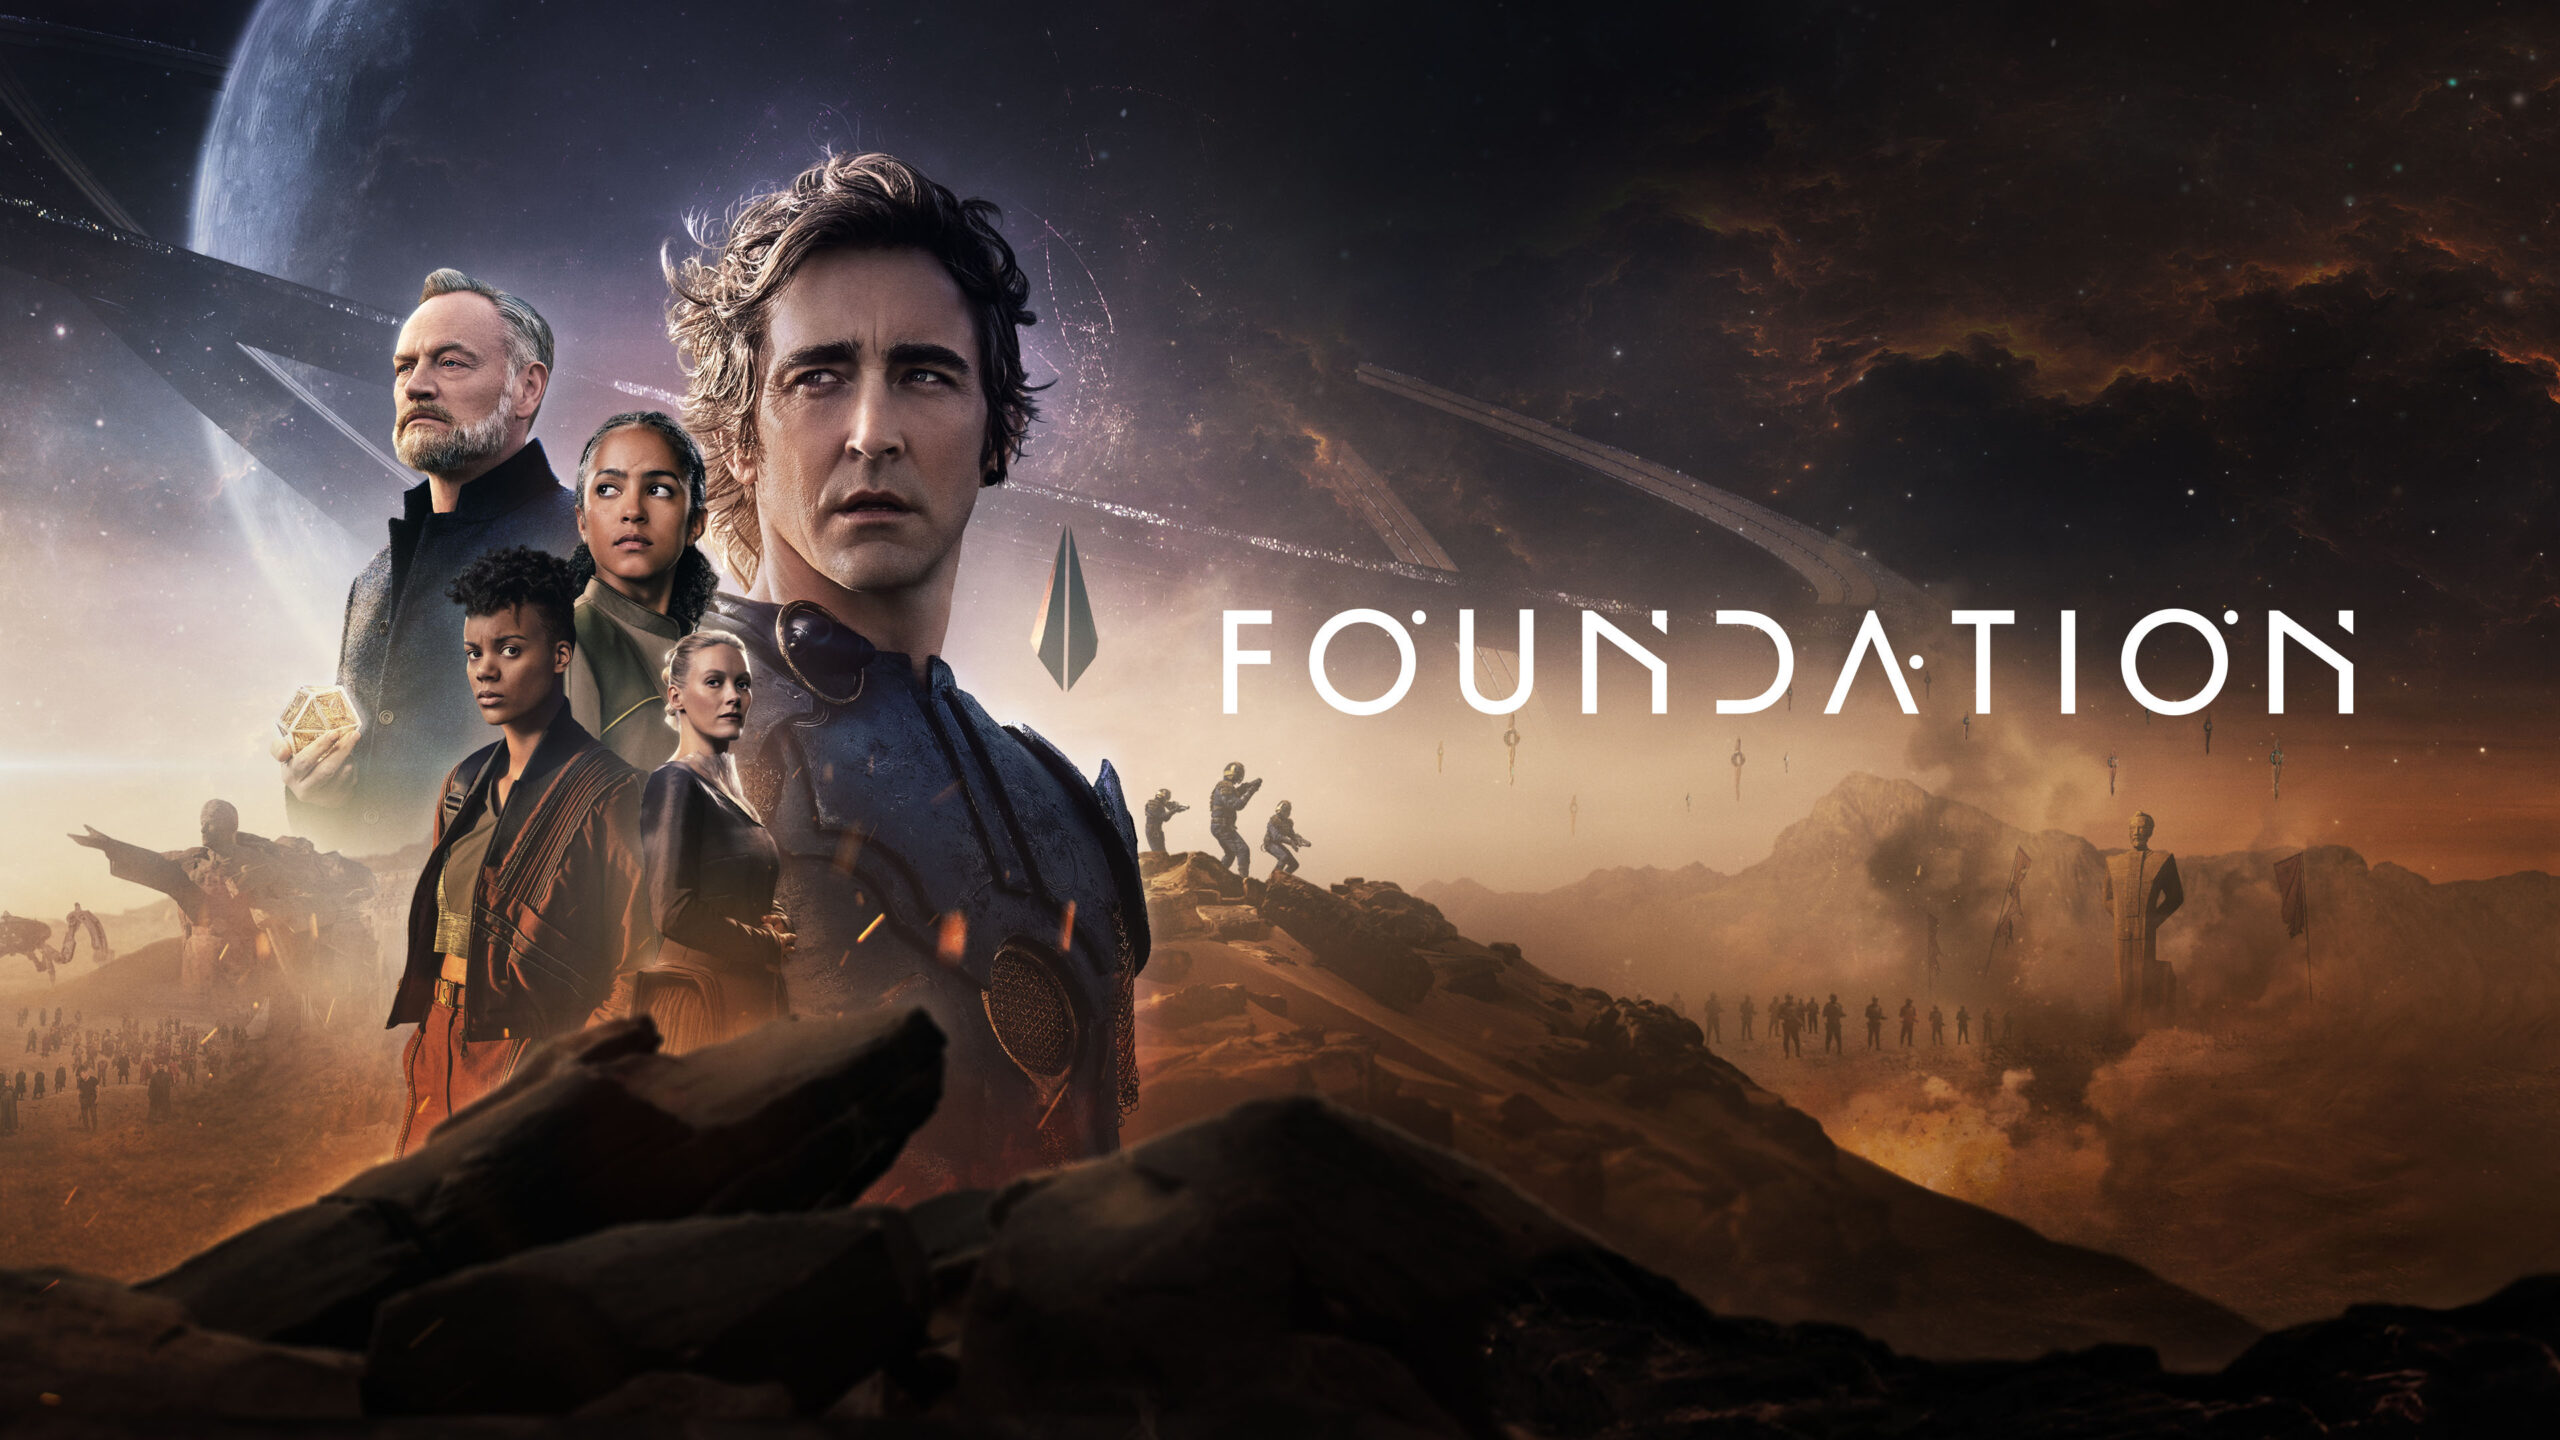 "The Foundation: A Sci-Fi Masterpiece that Transcends Time and Space"